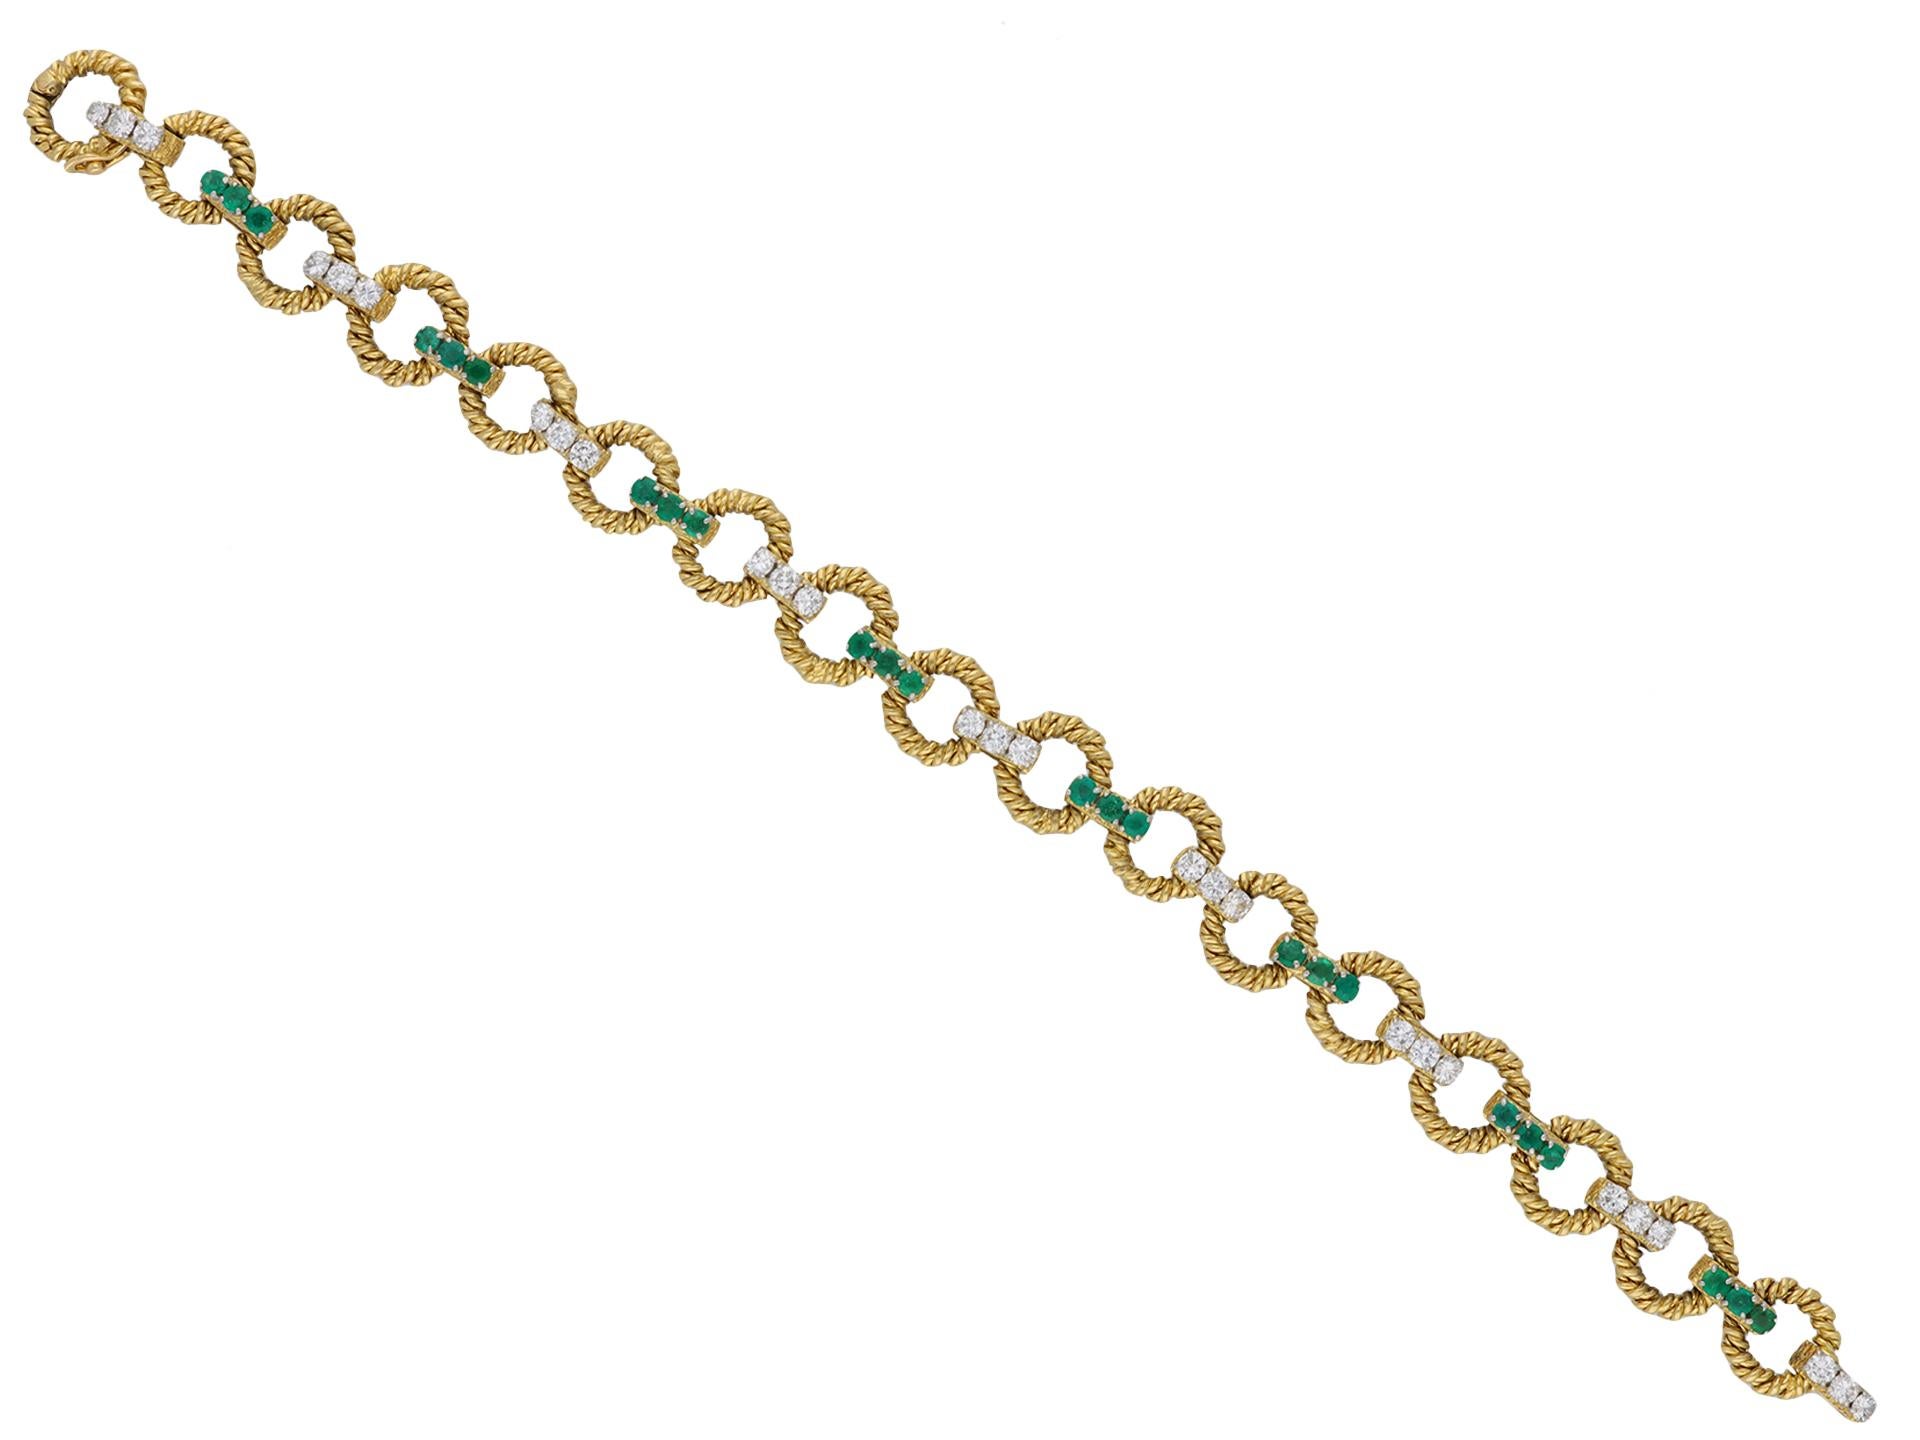 Boucheron diamond and emerald bracelet. A yellow gold bracelet set with twenty-seven round transitional cut diamonds in closed back claw settings with a combined approximate weight of 1.62 carats, further set with twenty-four round mixed cut natural